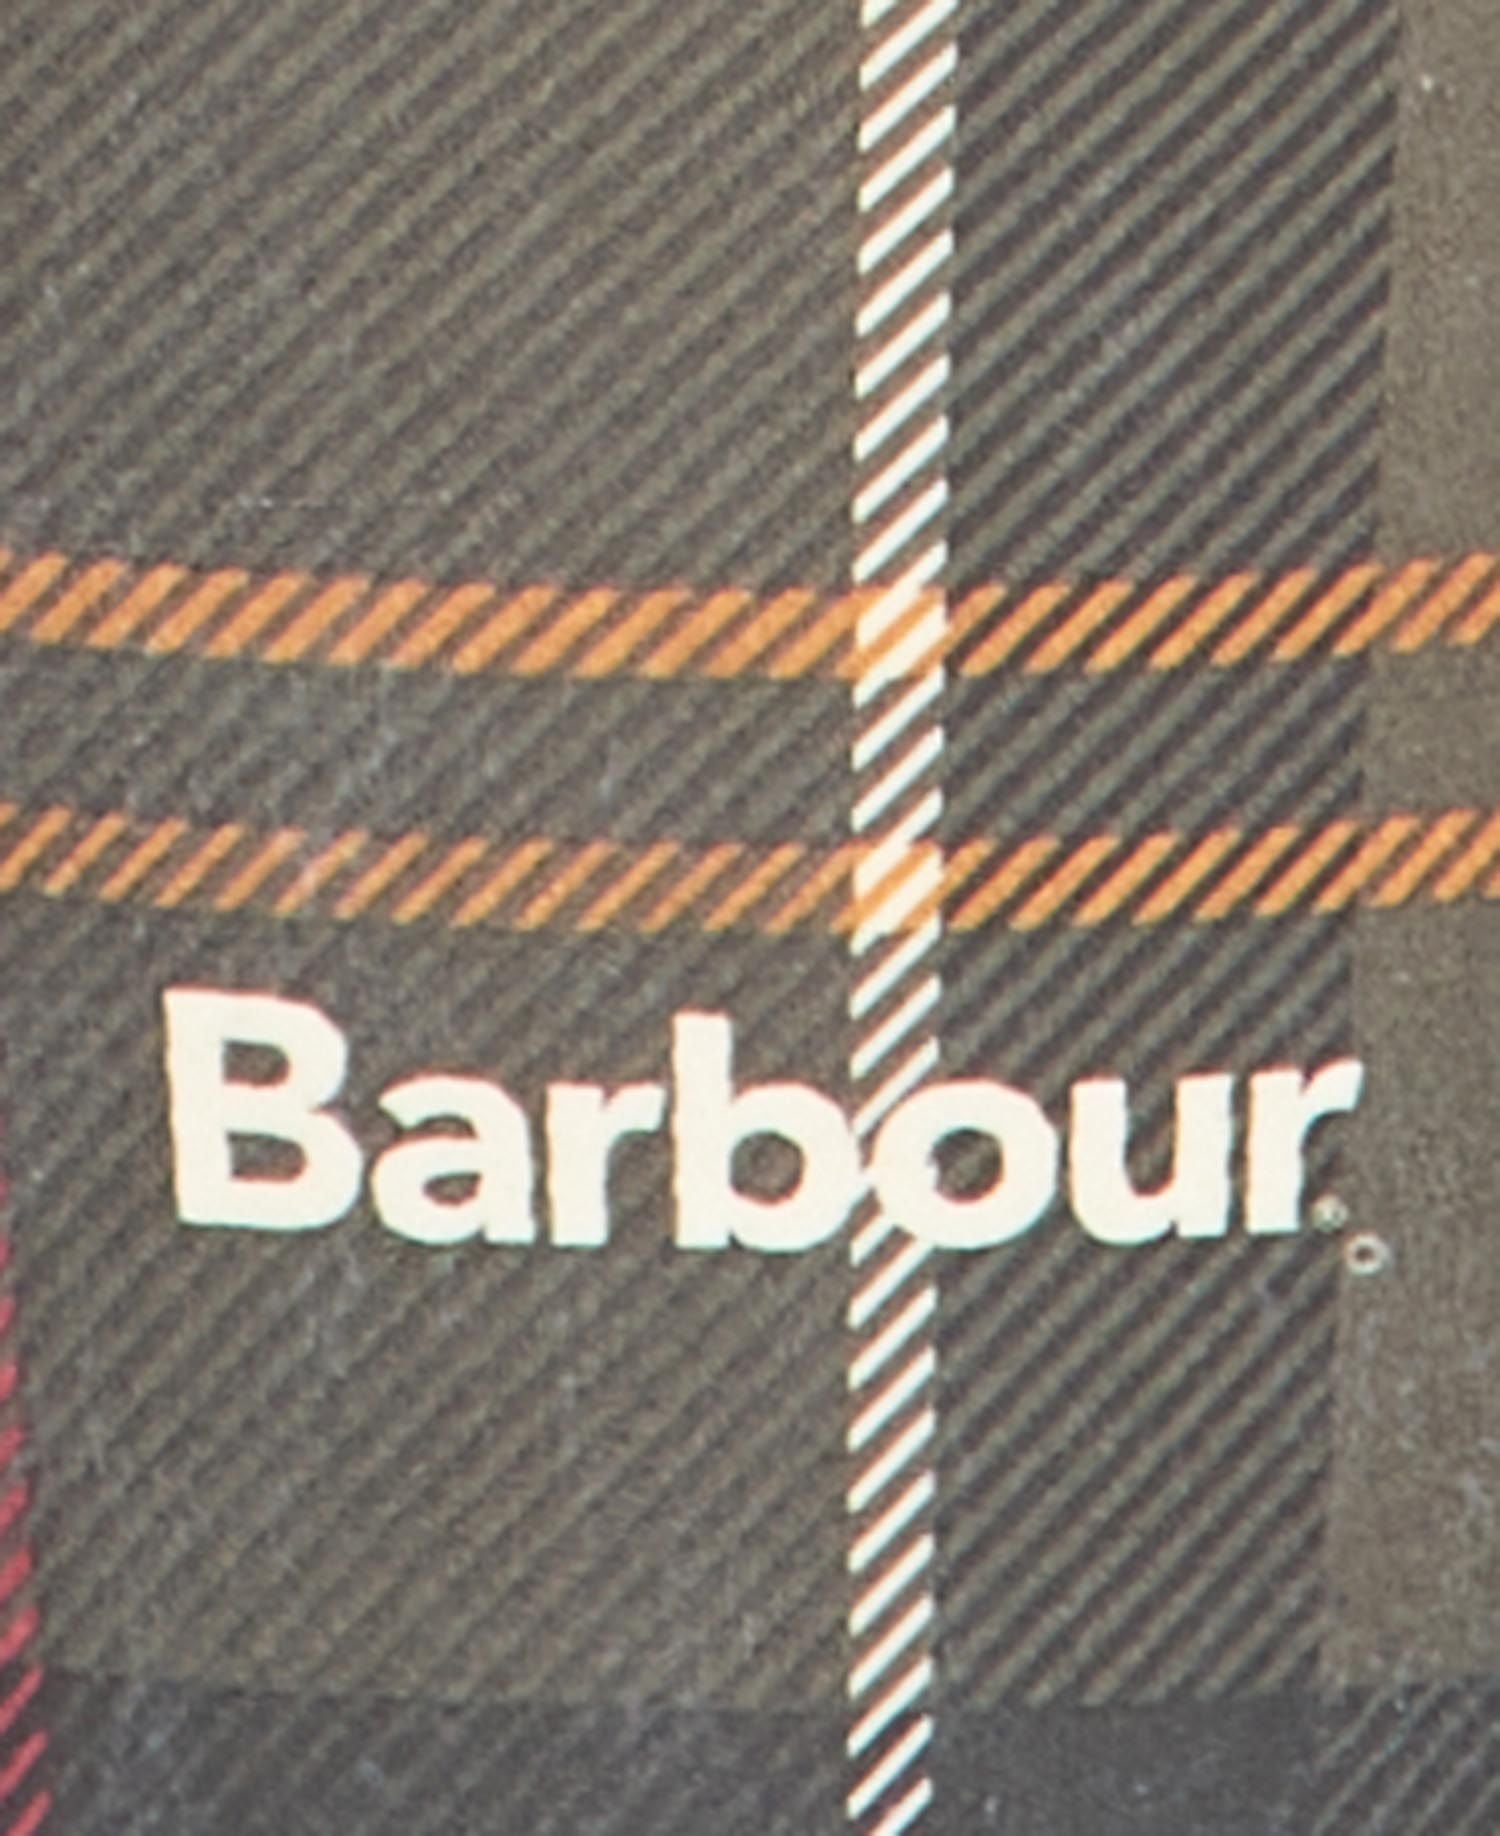 Barbour Set of 4 Bamboo Cups